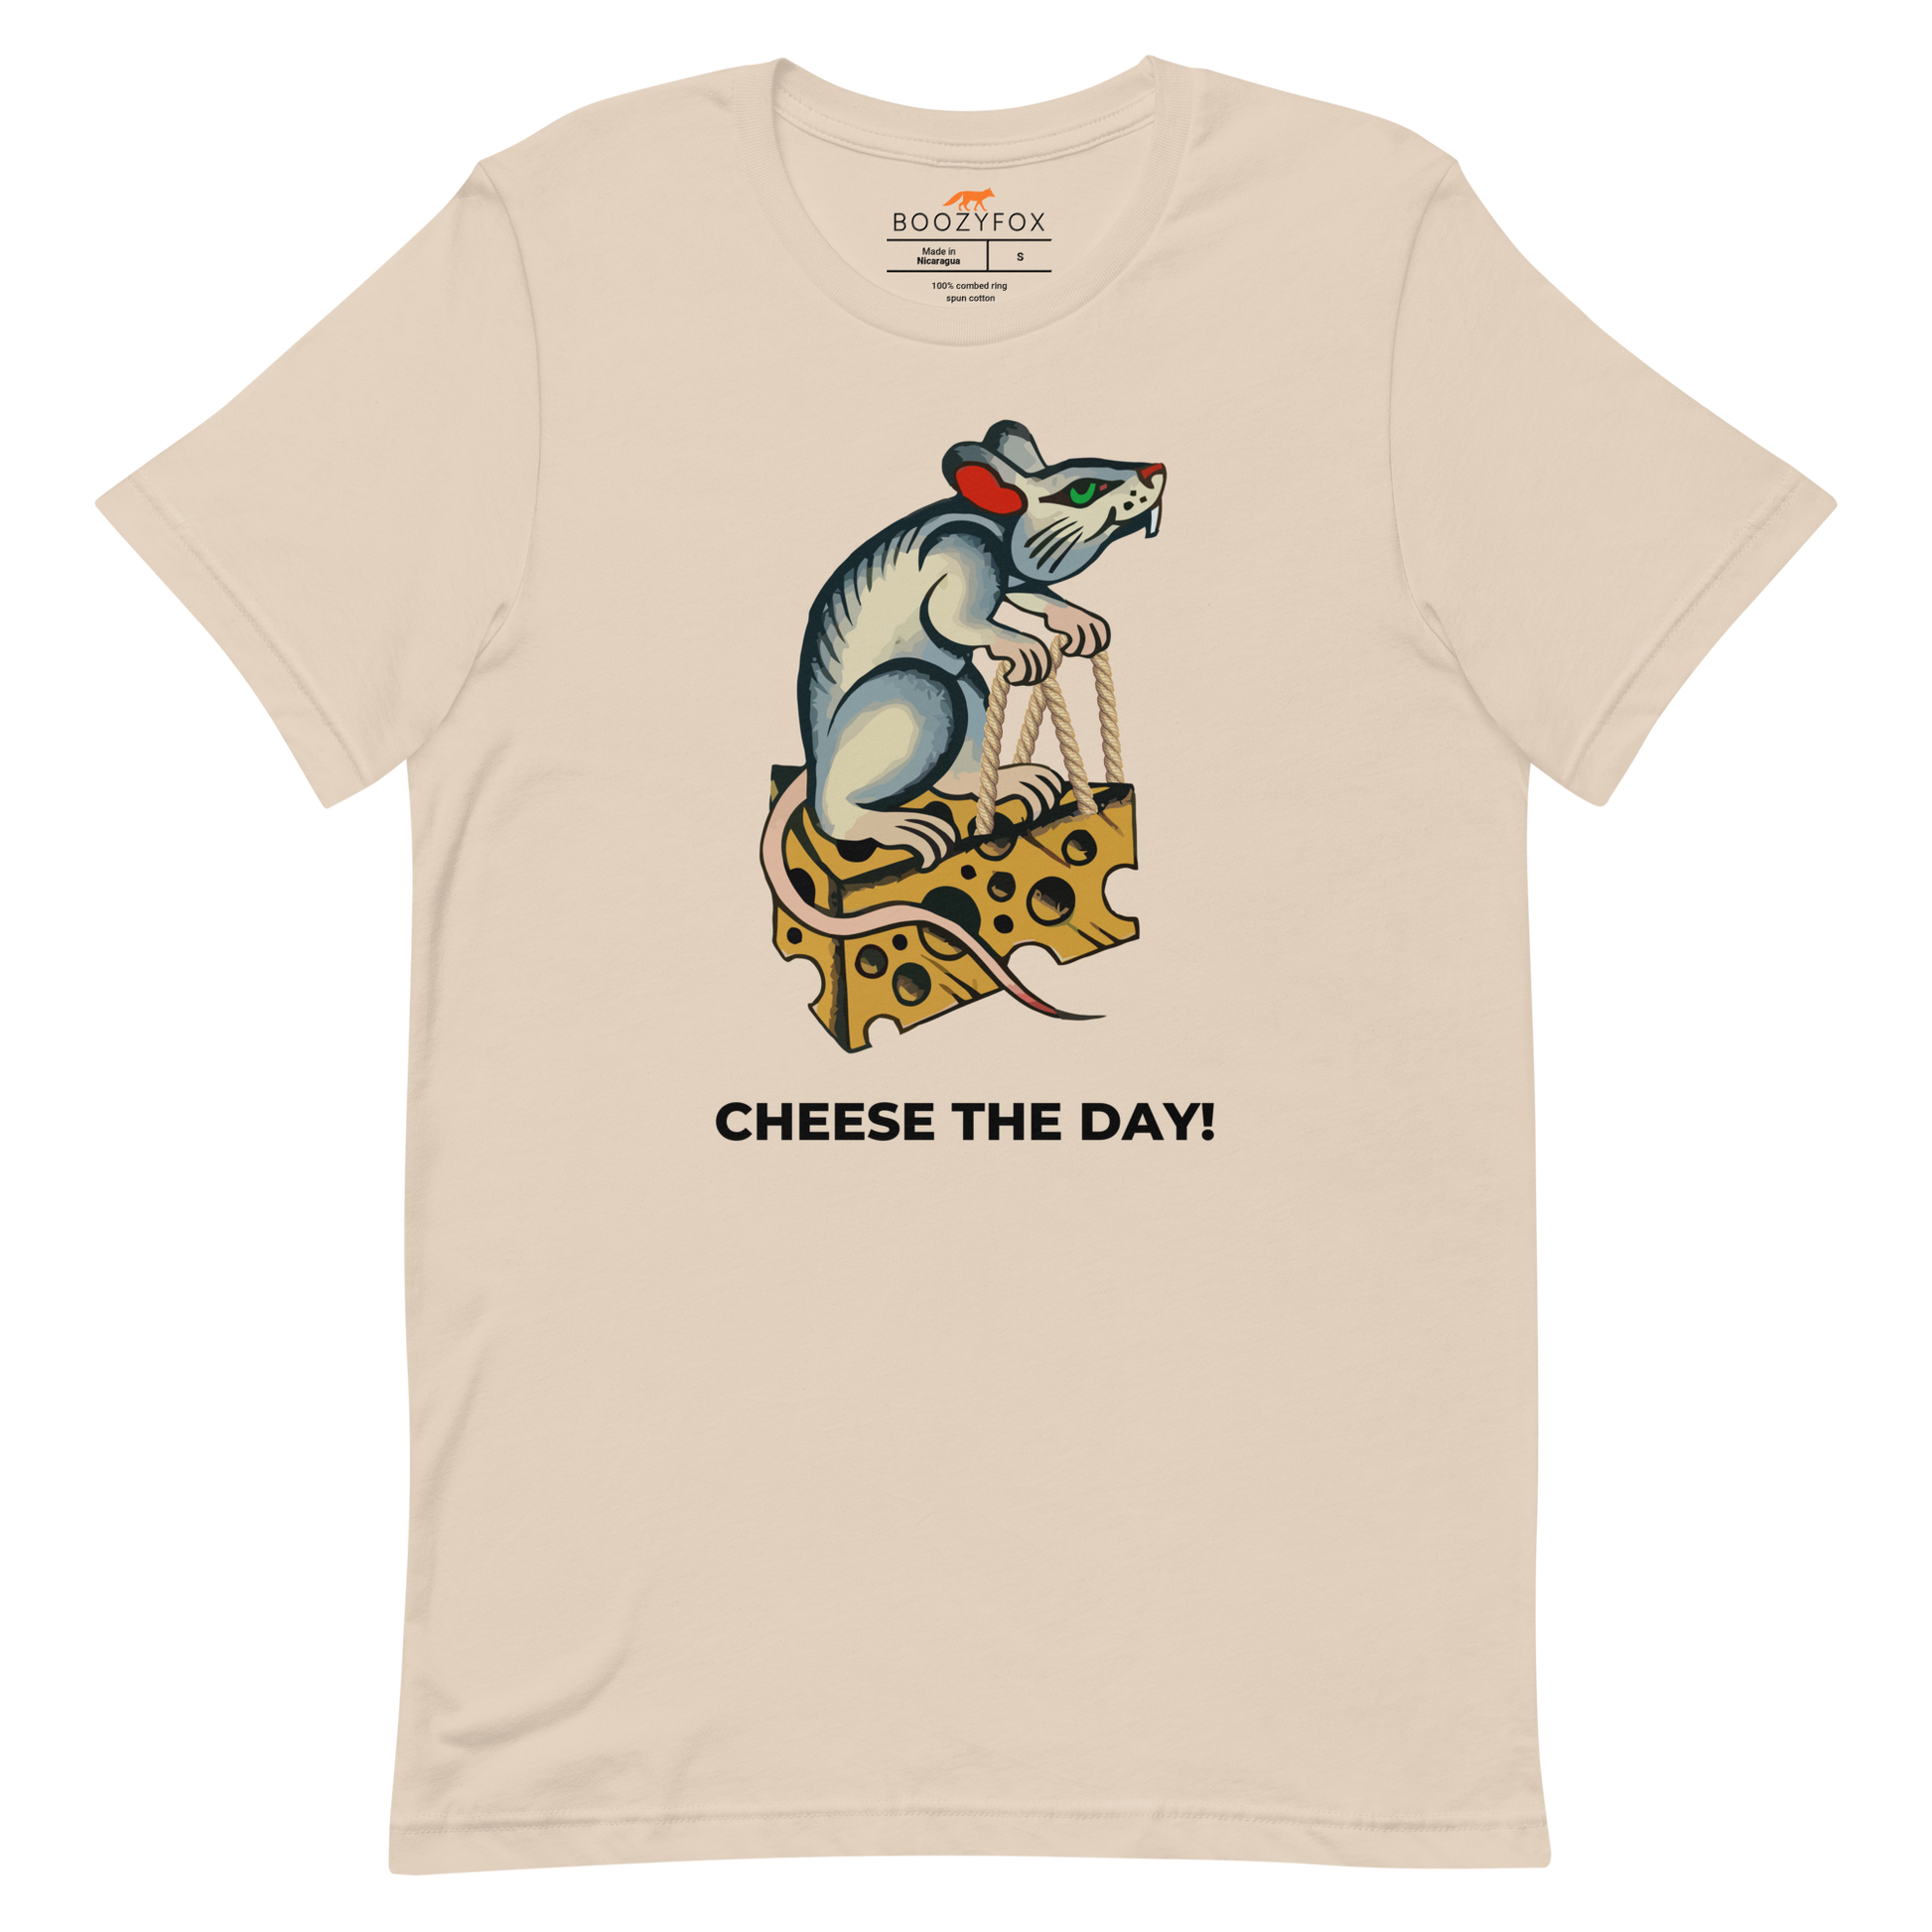 Soft Cream Premium Rat T-Shirt featuring a hilarious Cheese The Day graphic on the chest - Funny Graphic Rat Tees - Boozy Fox